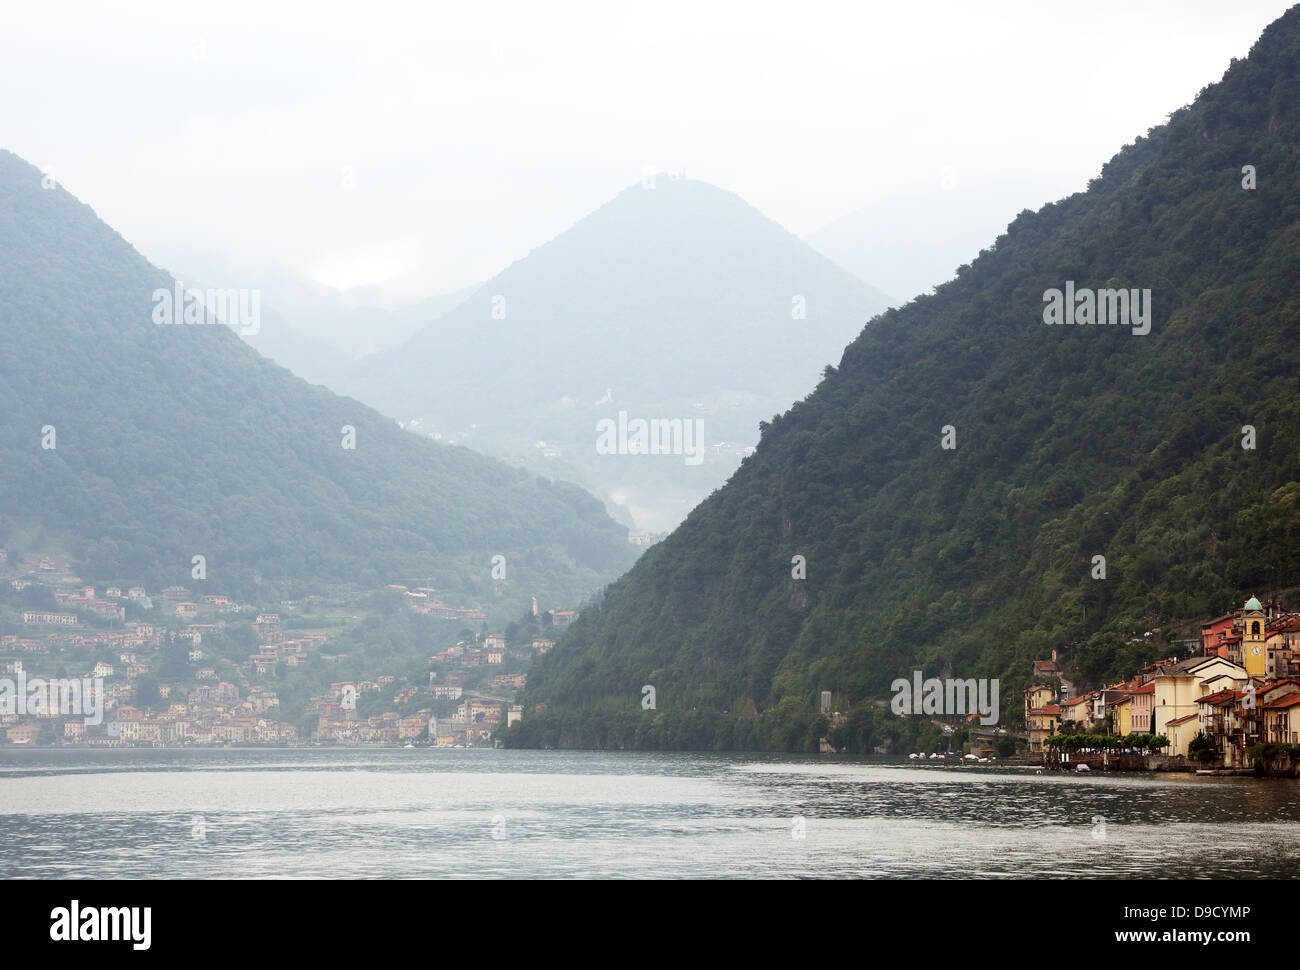 Mountains soar above villages along the shores of Lake Como in Northern Italy Stock Photo